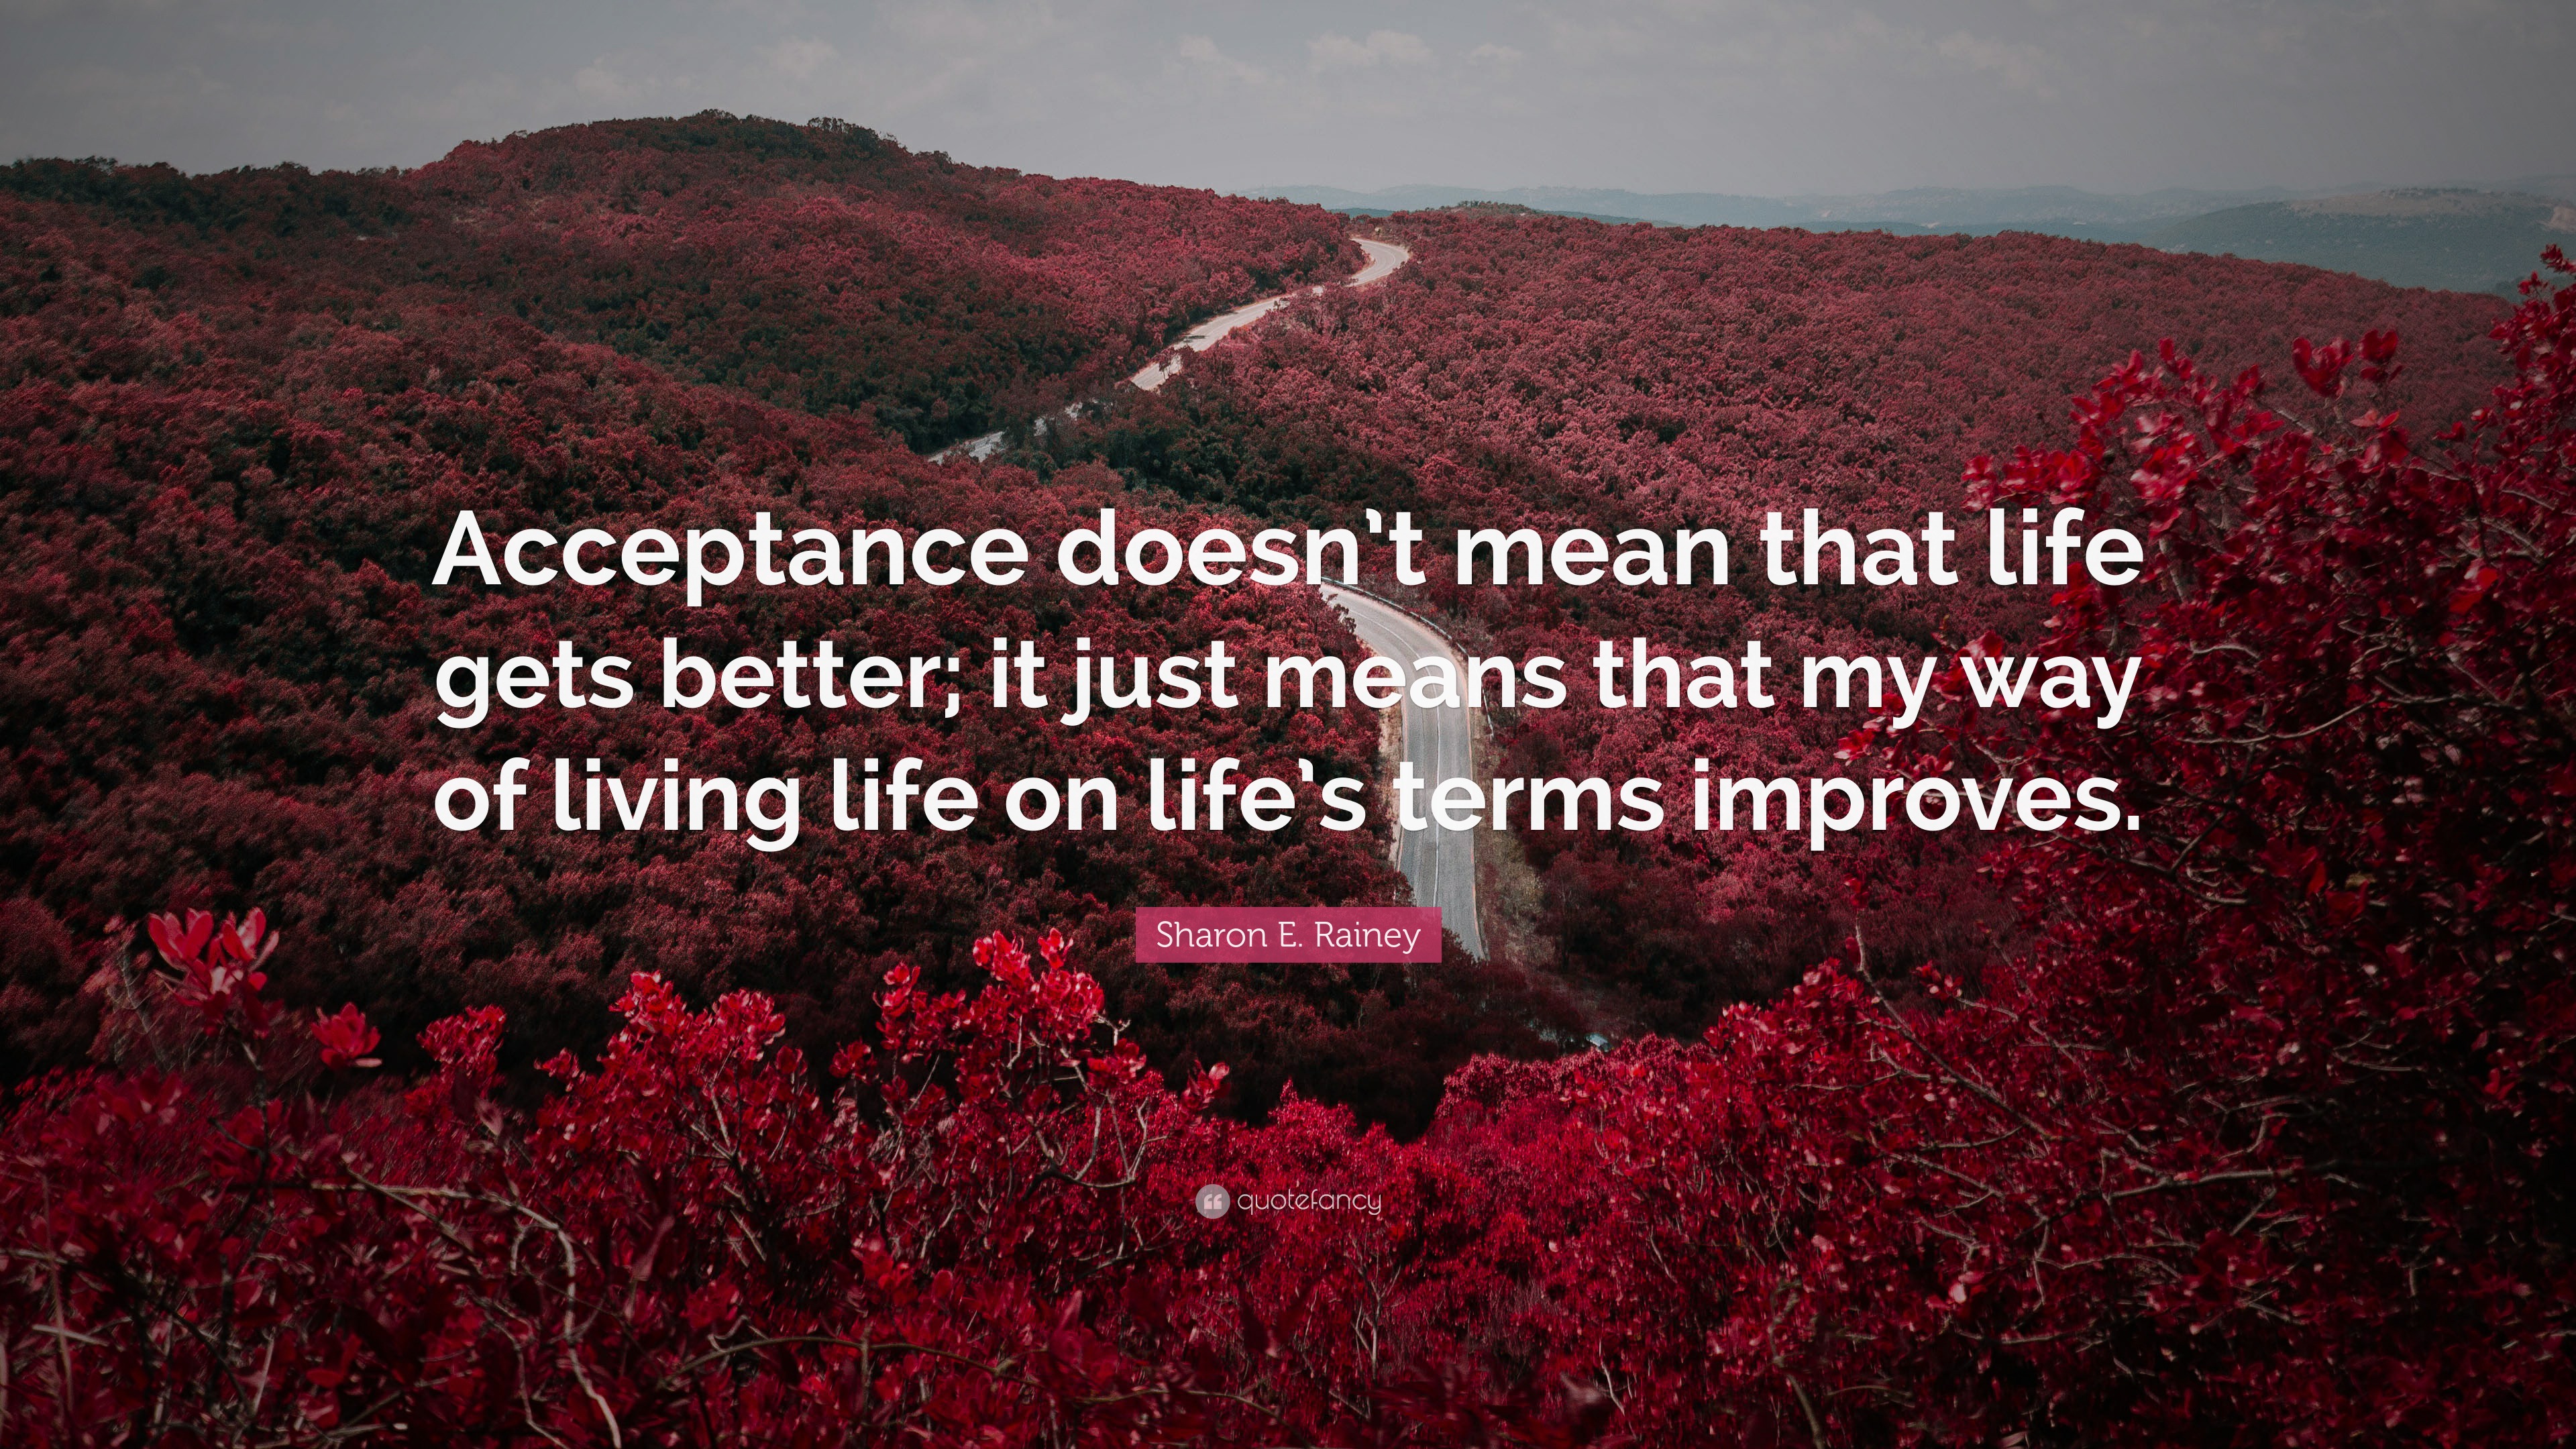 Sharon E. Rainey Quote: “Acceptance doesn’t mean that life gets better ...